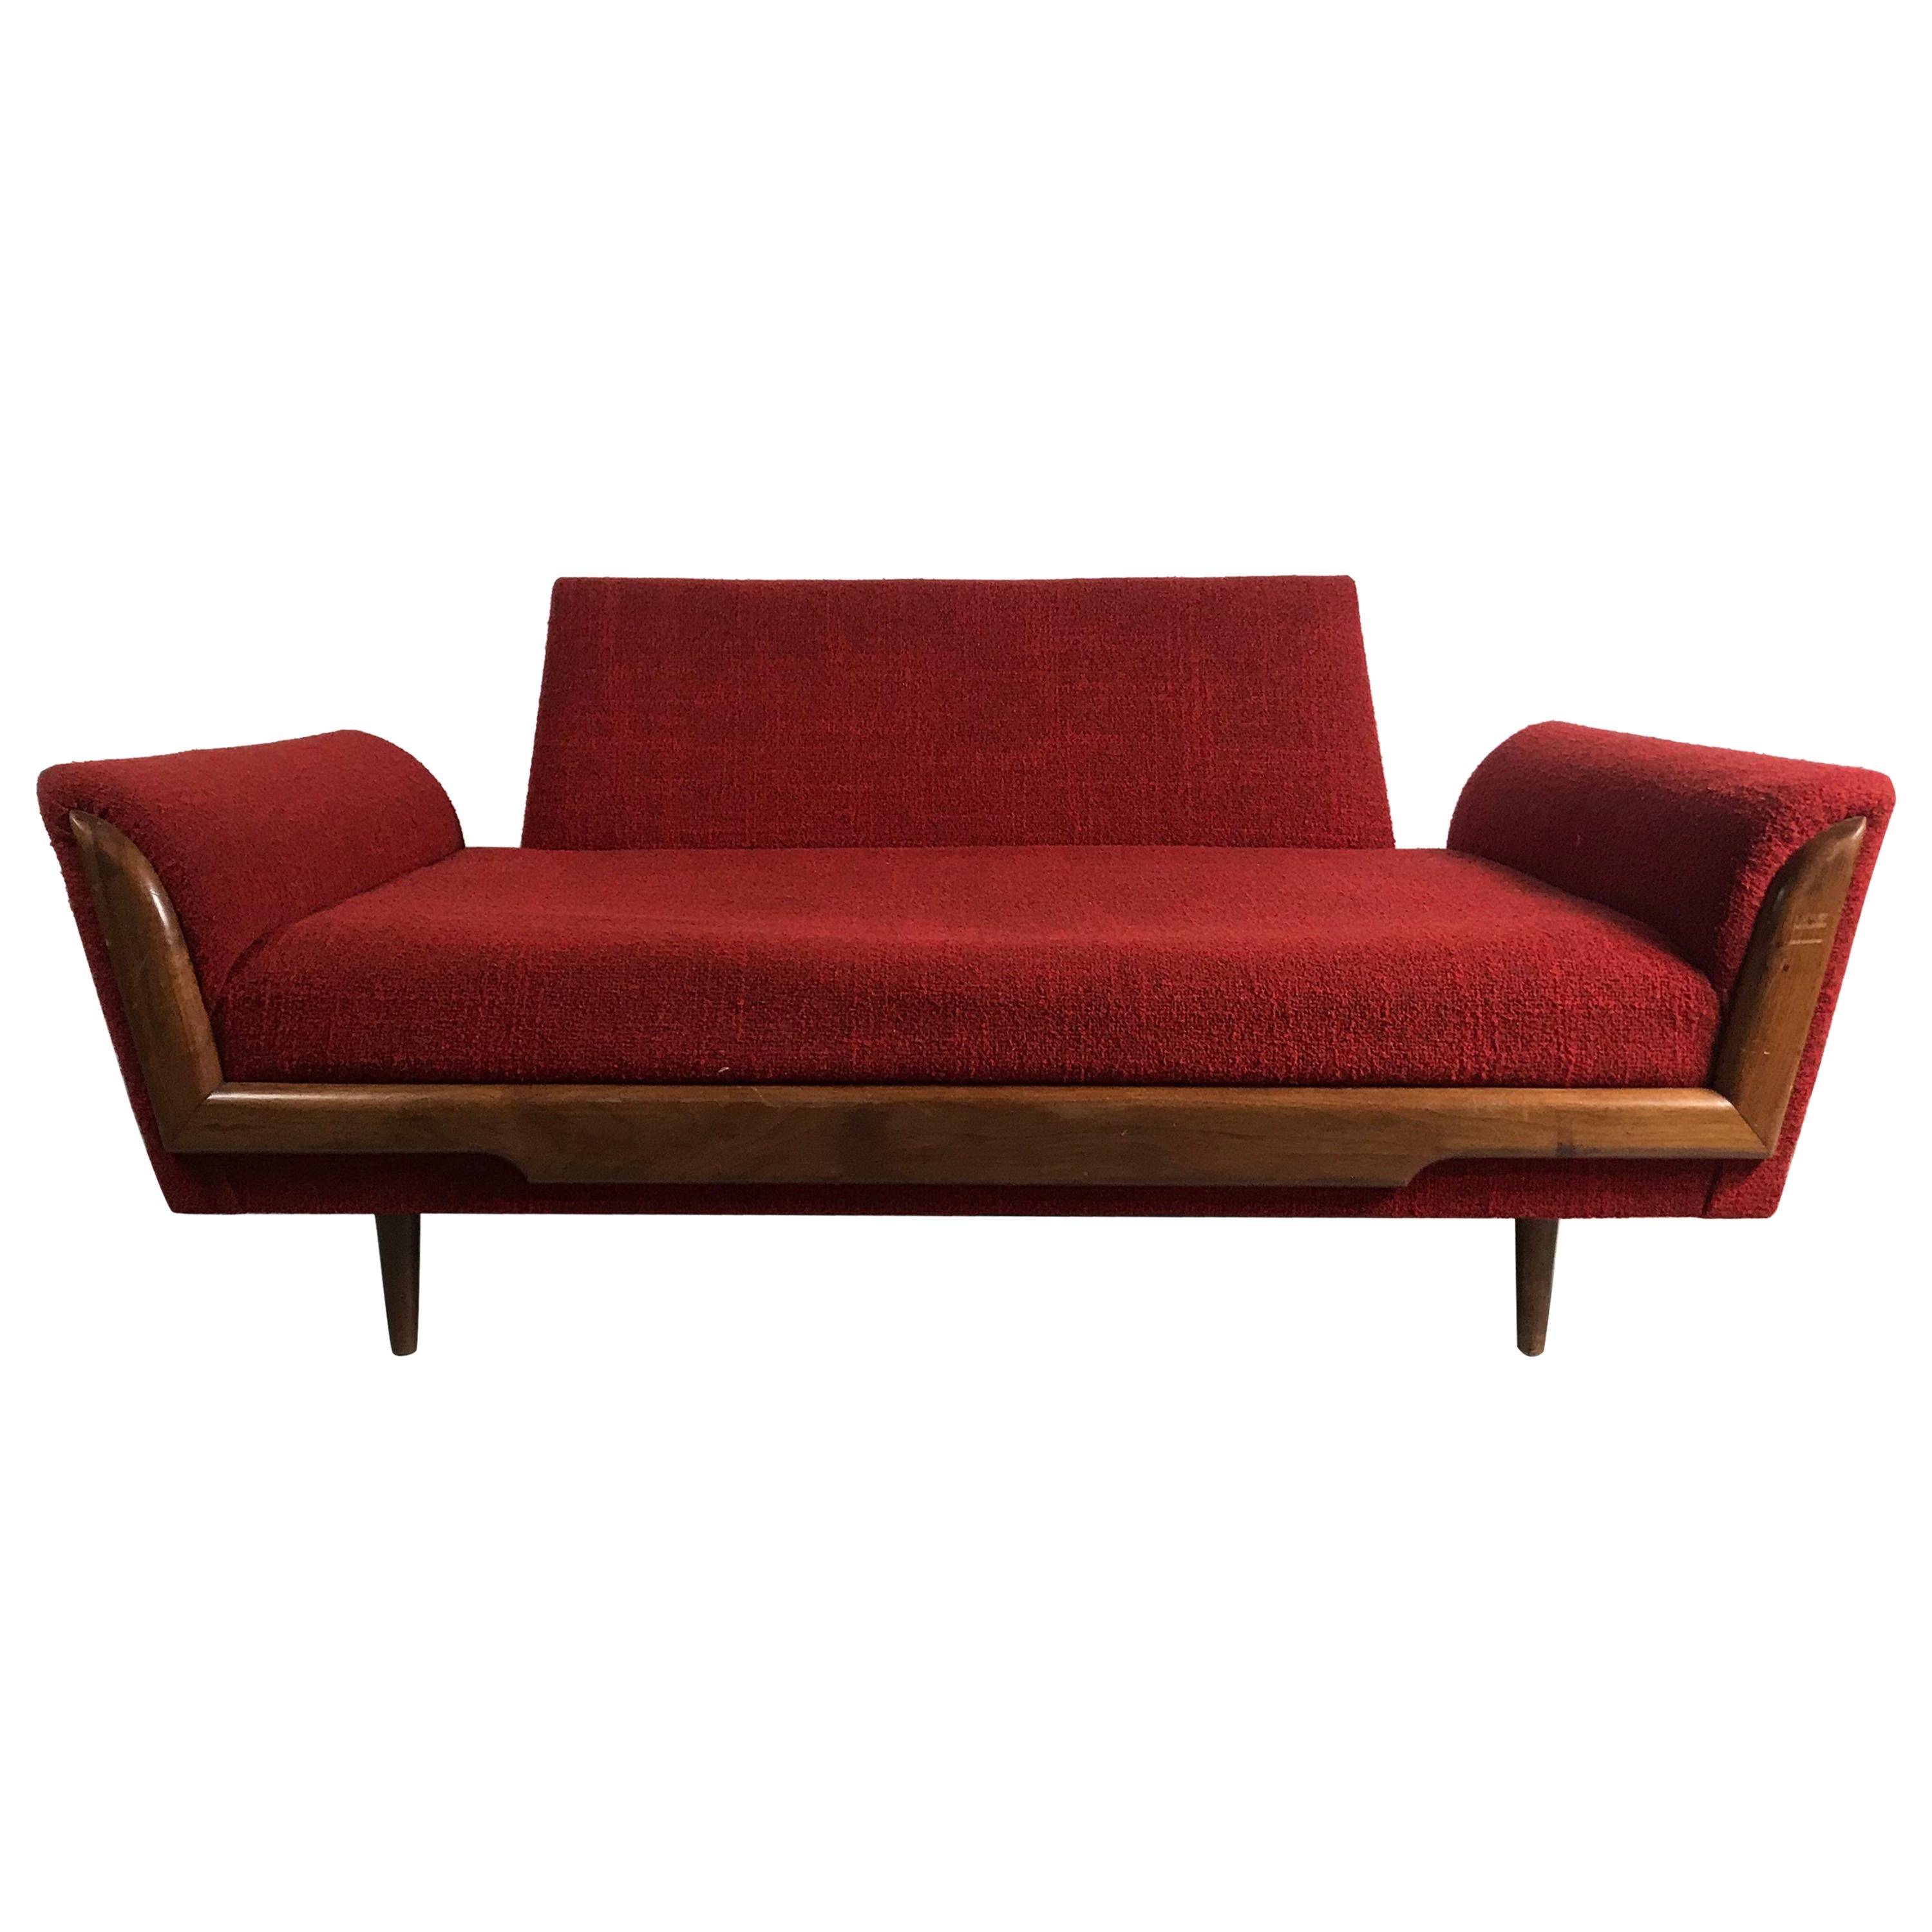 Classic Modernist 2-Seat Sofa, Sculpted Walnut Attributed to Adrian Pearsall